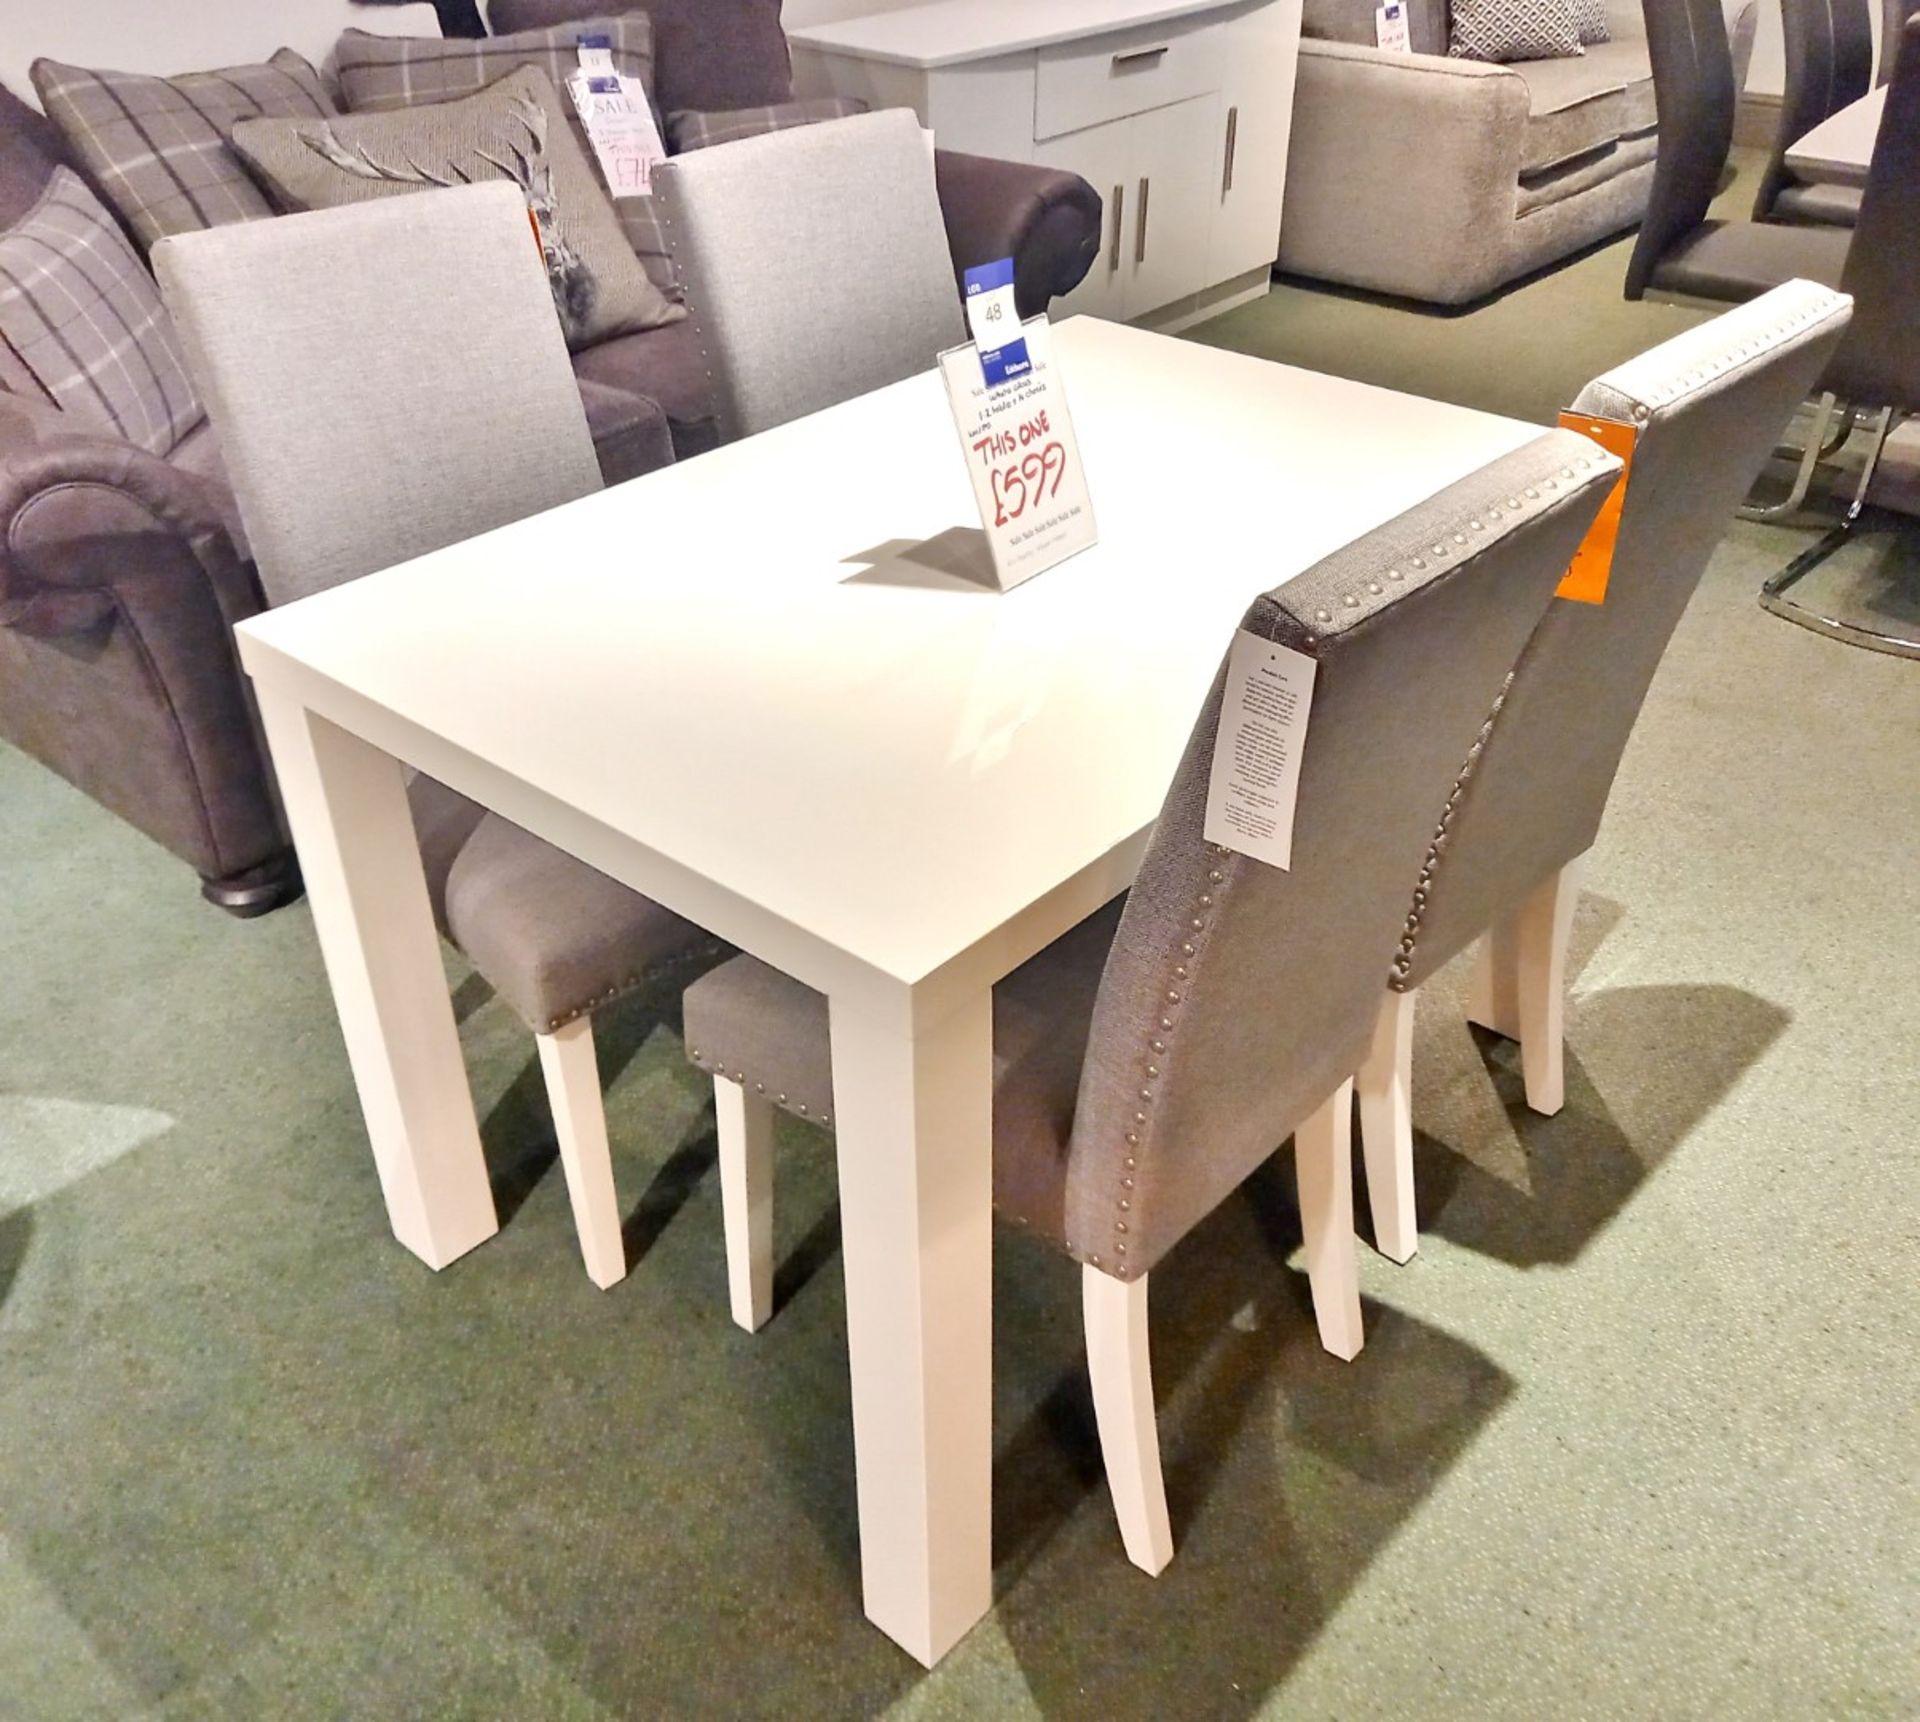 White Gloss 1.2m Table & 4 Chairs (1200 x 800) Rrp. £599